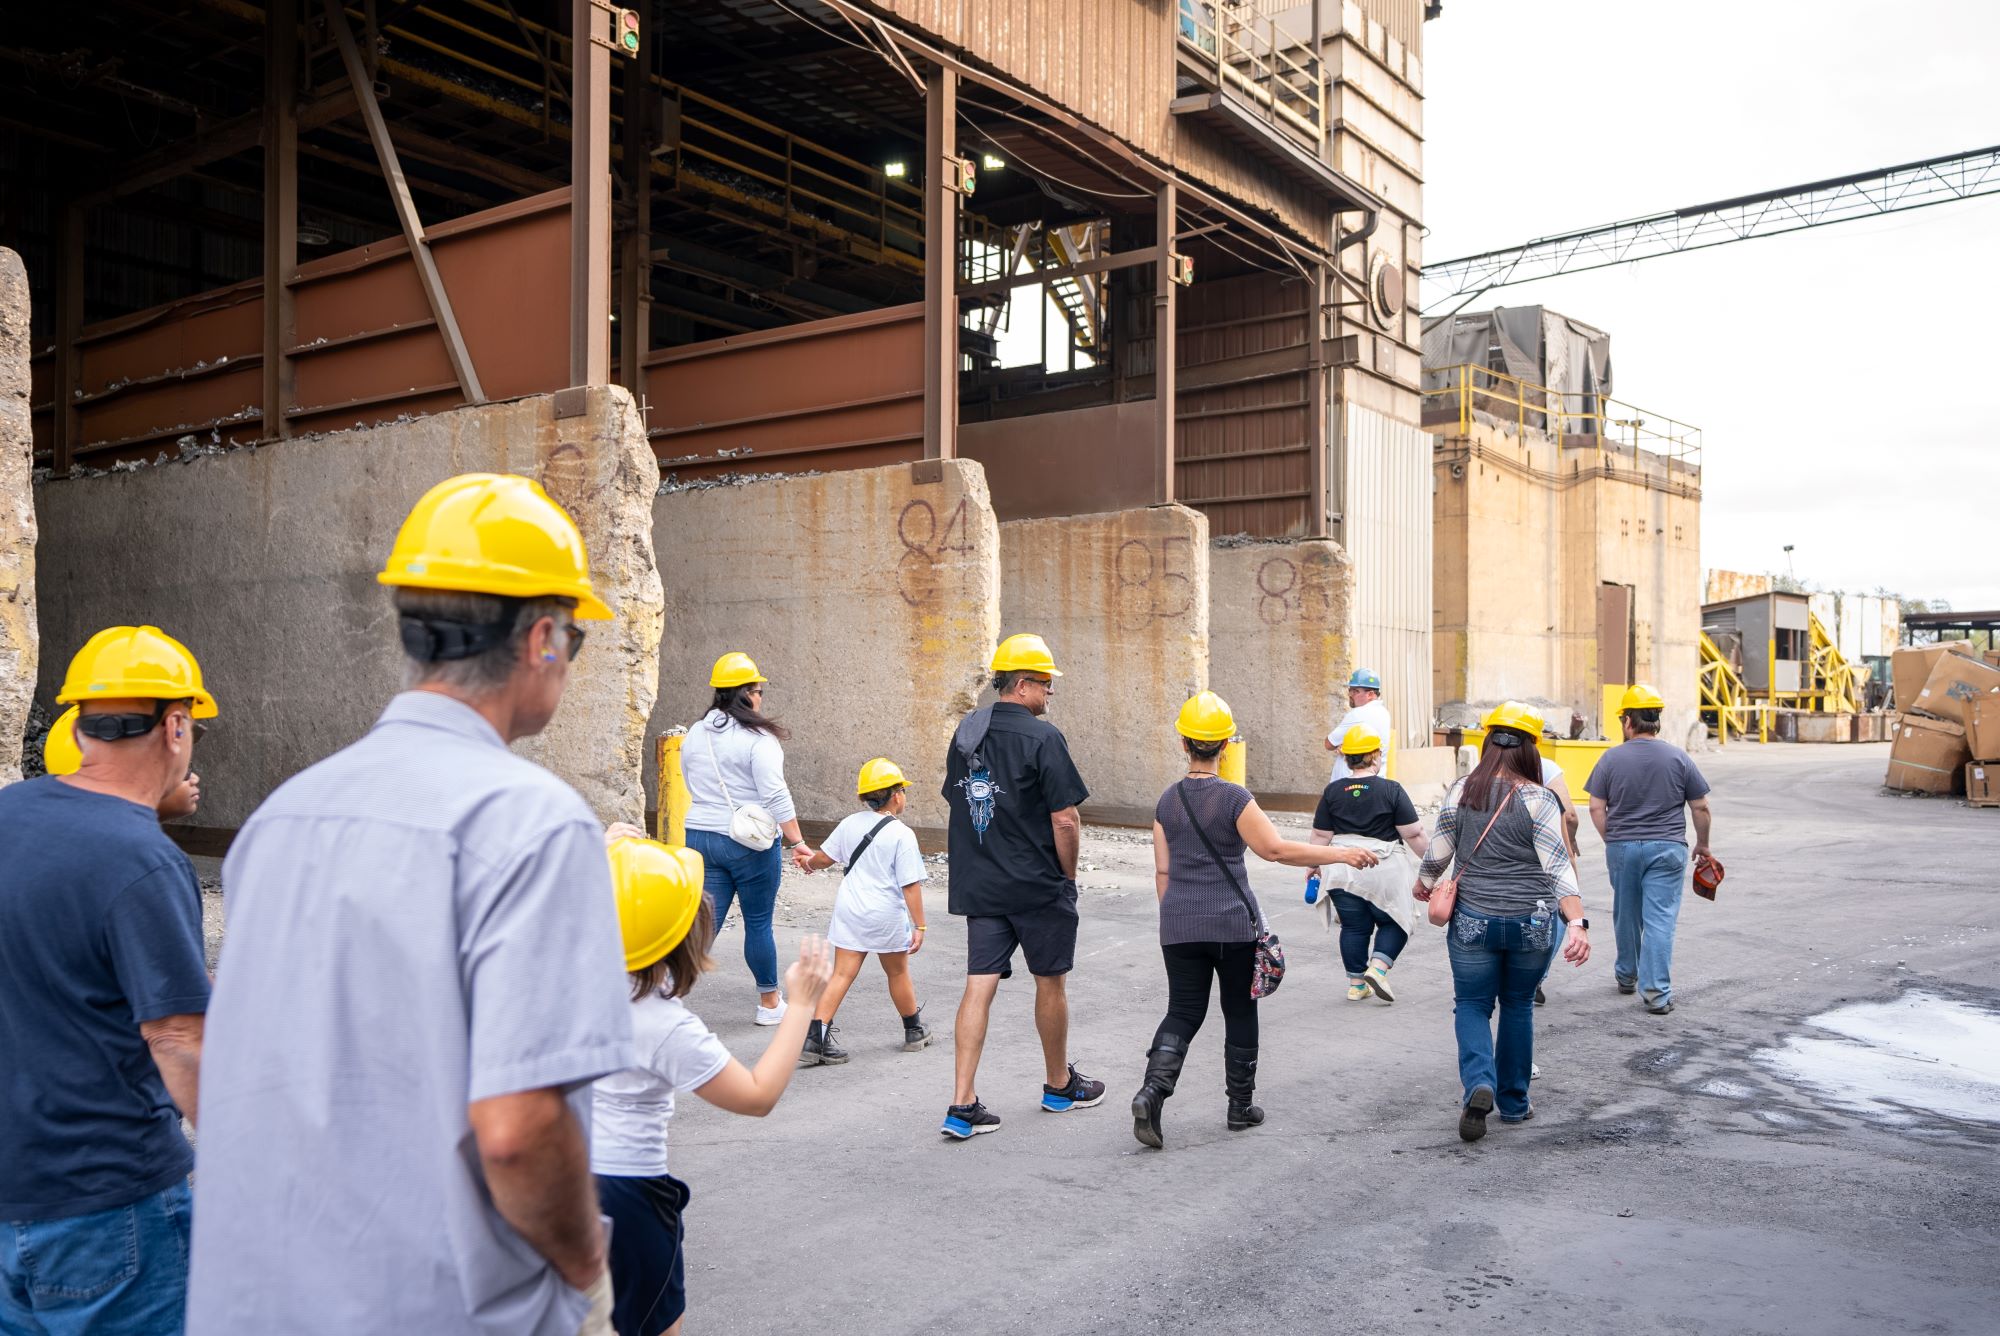 A group of people in hardhats walk through an industrial area.